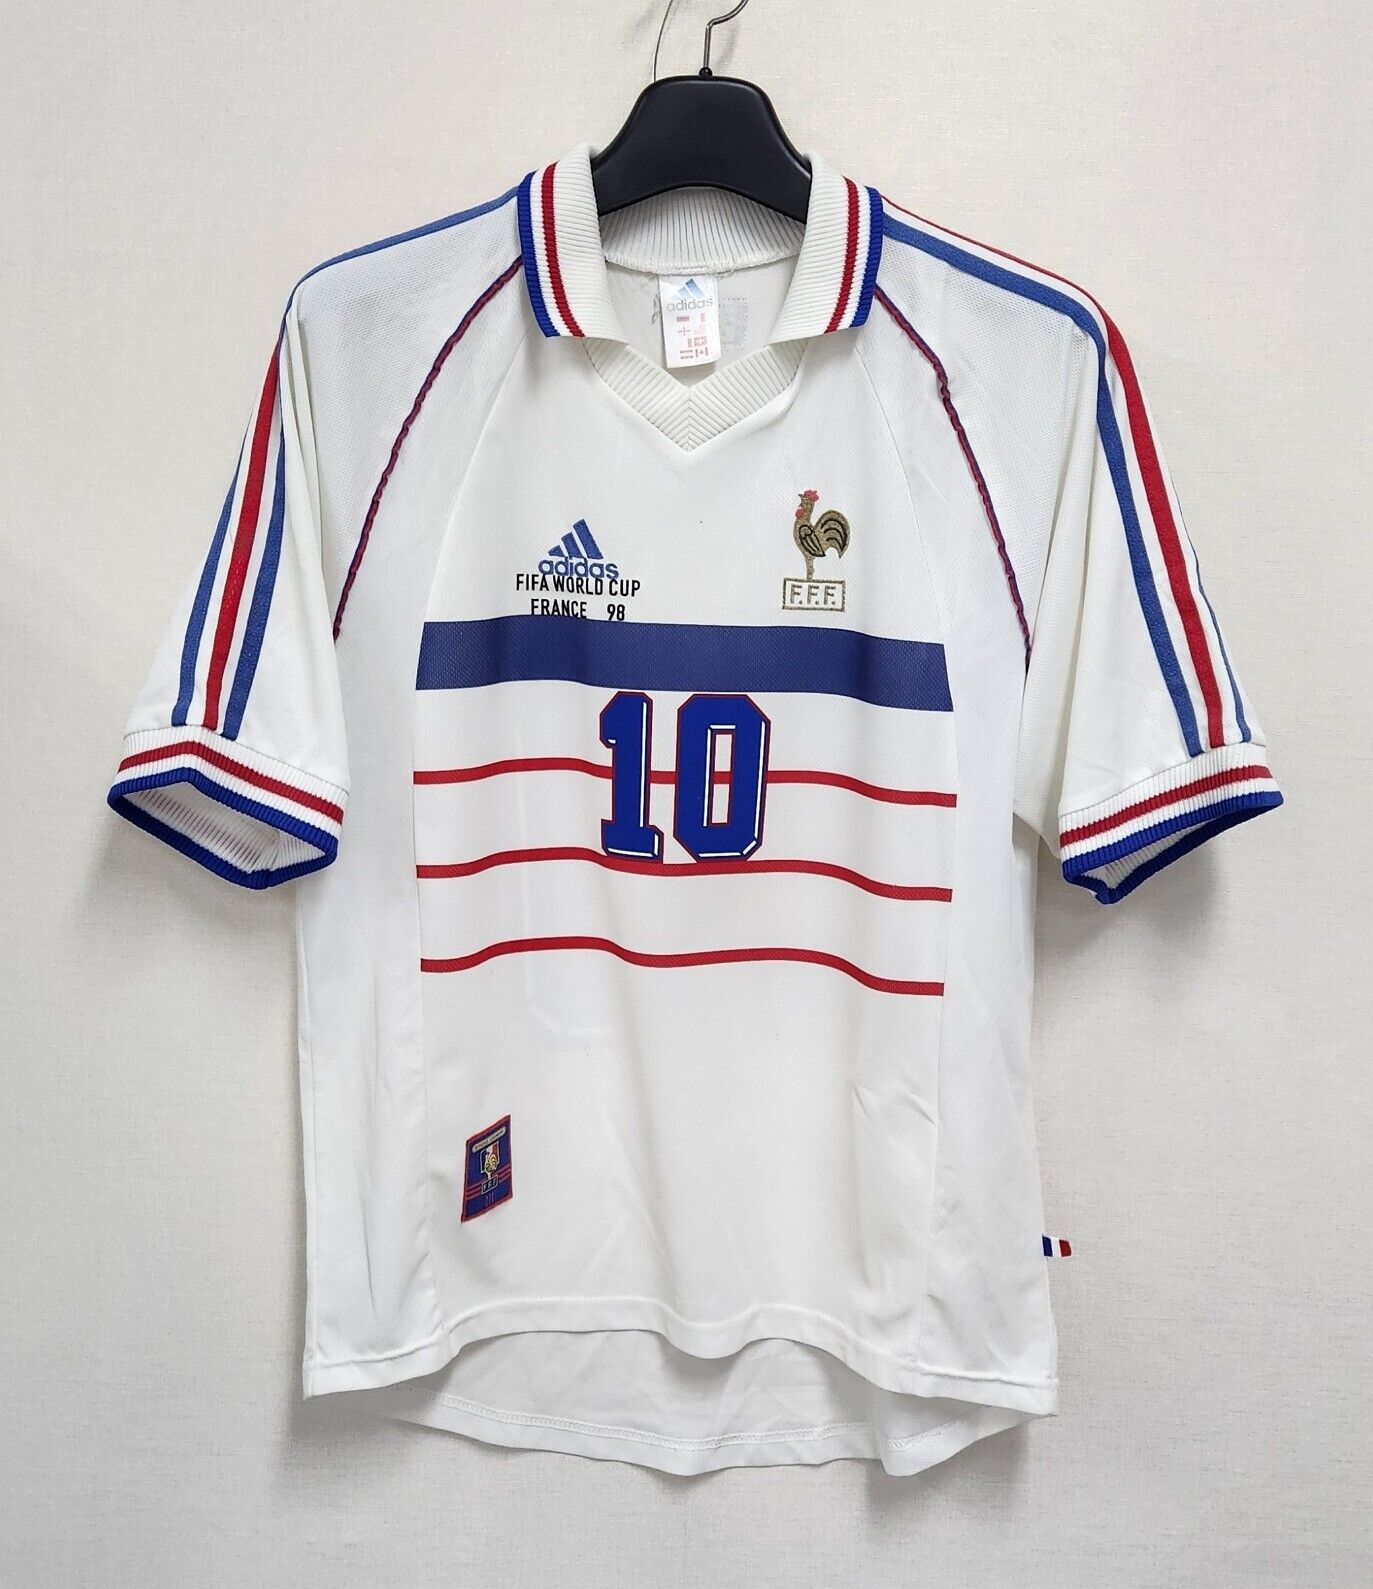 1998 France Retro Jersey (WC FINAL PATCHES)